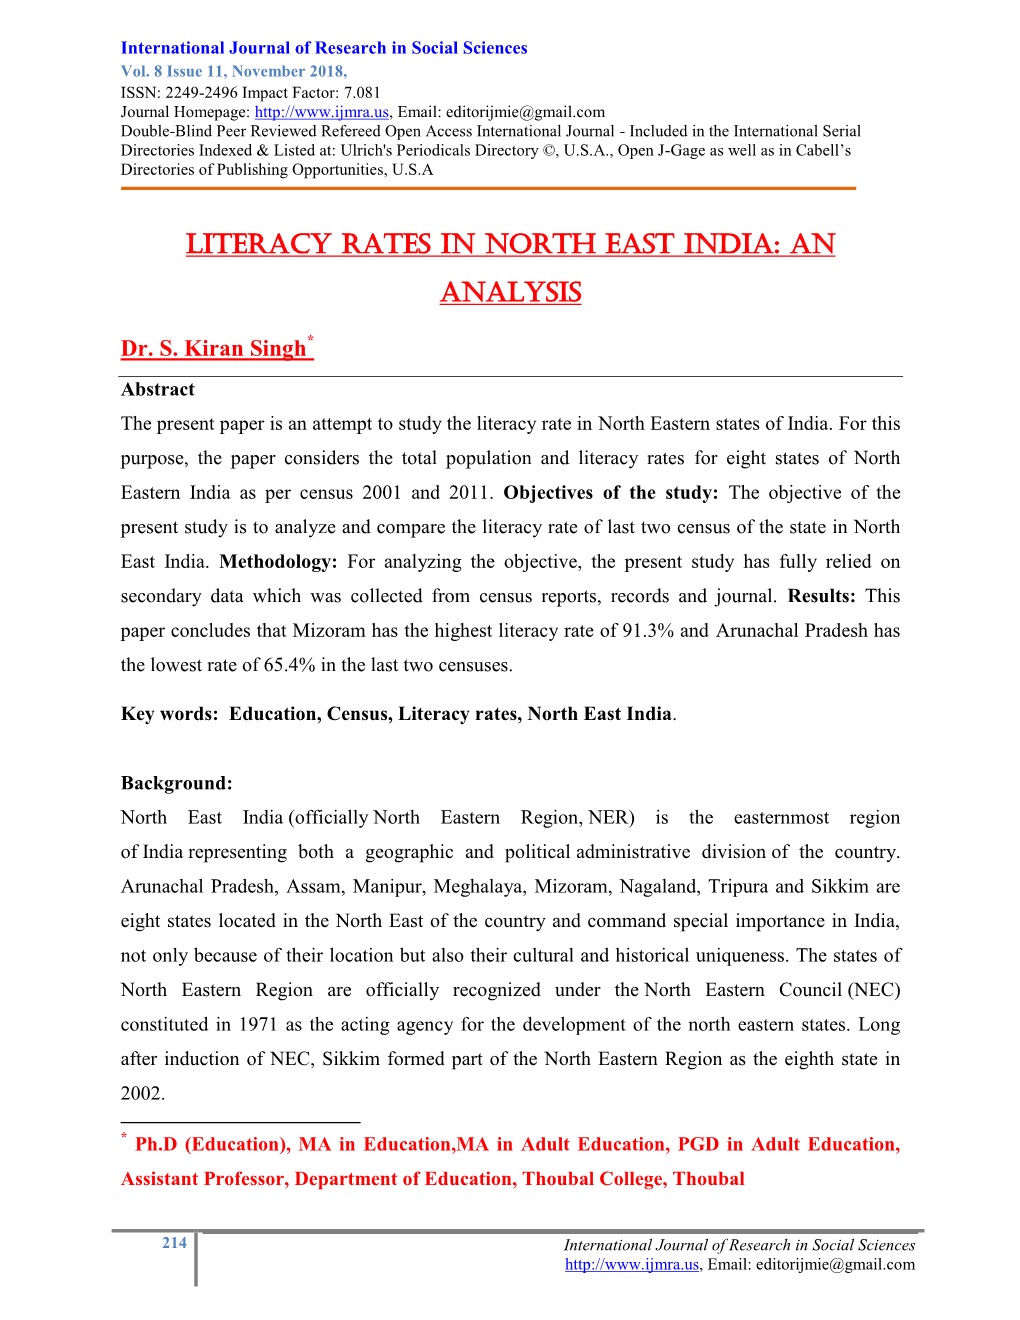 Literacy Rates in North East India: an Analysis